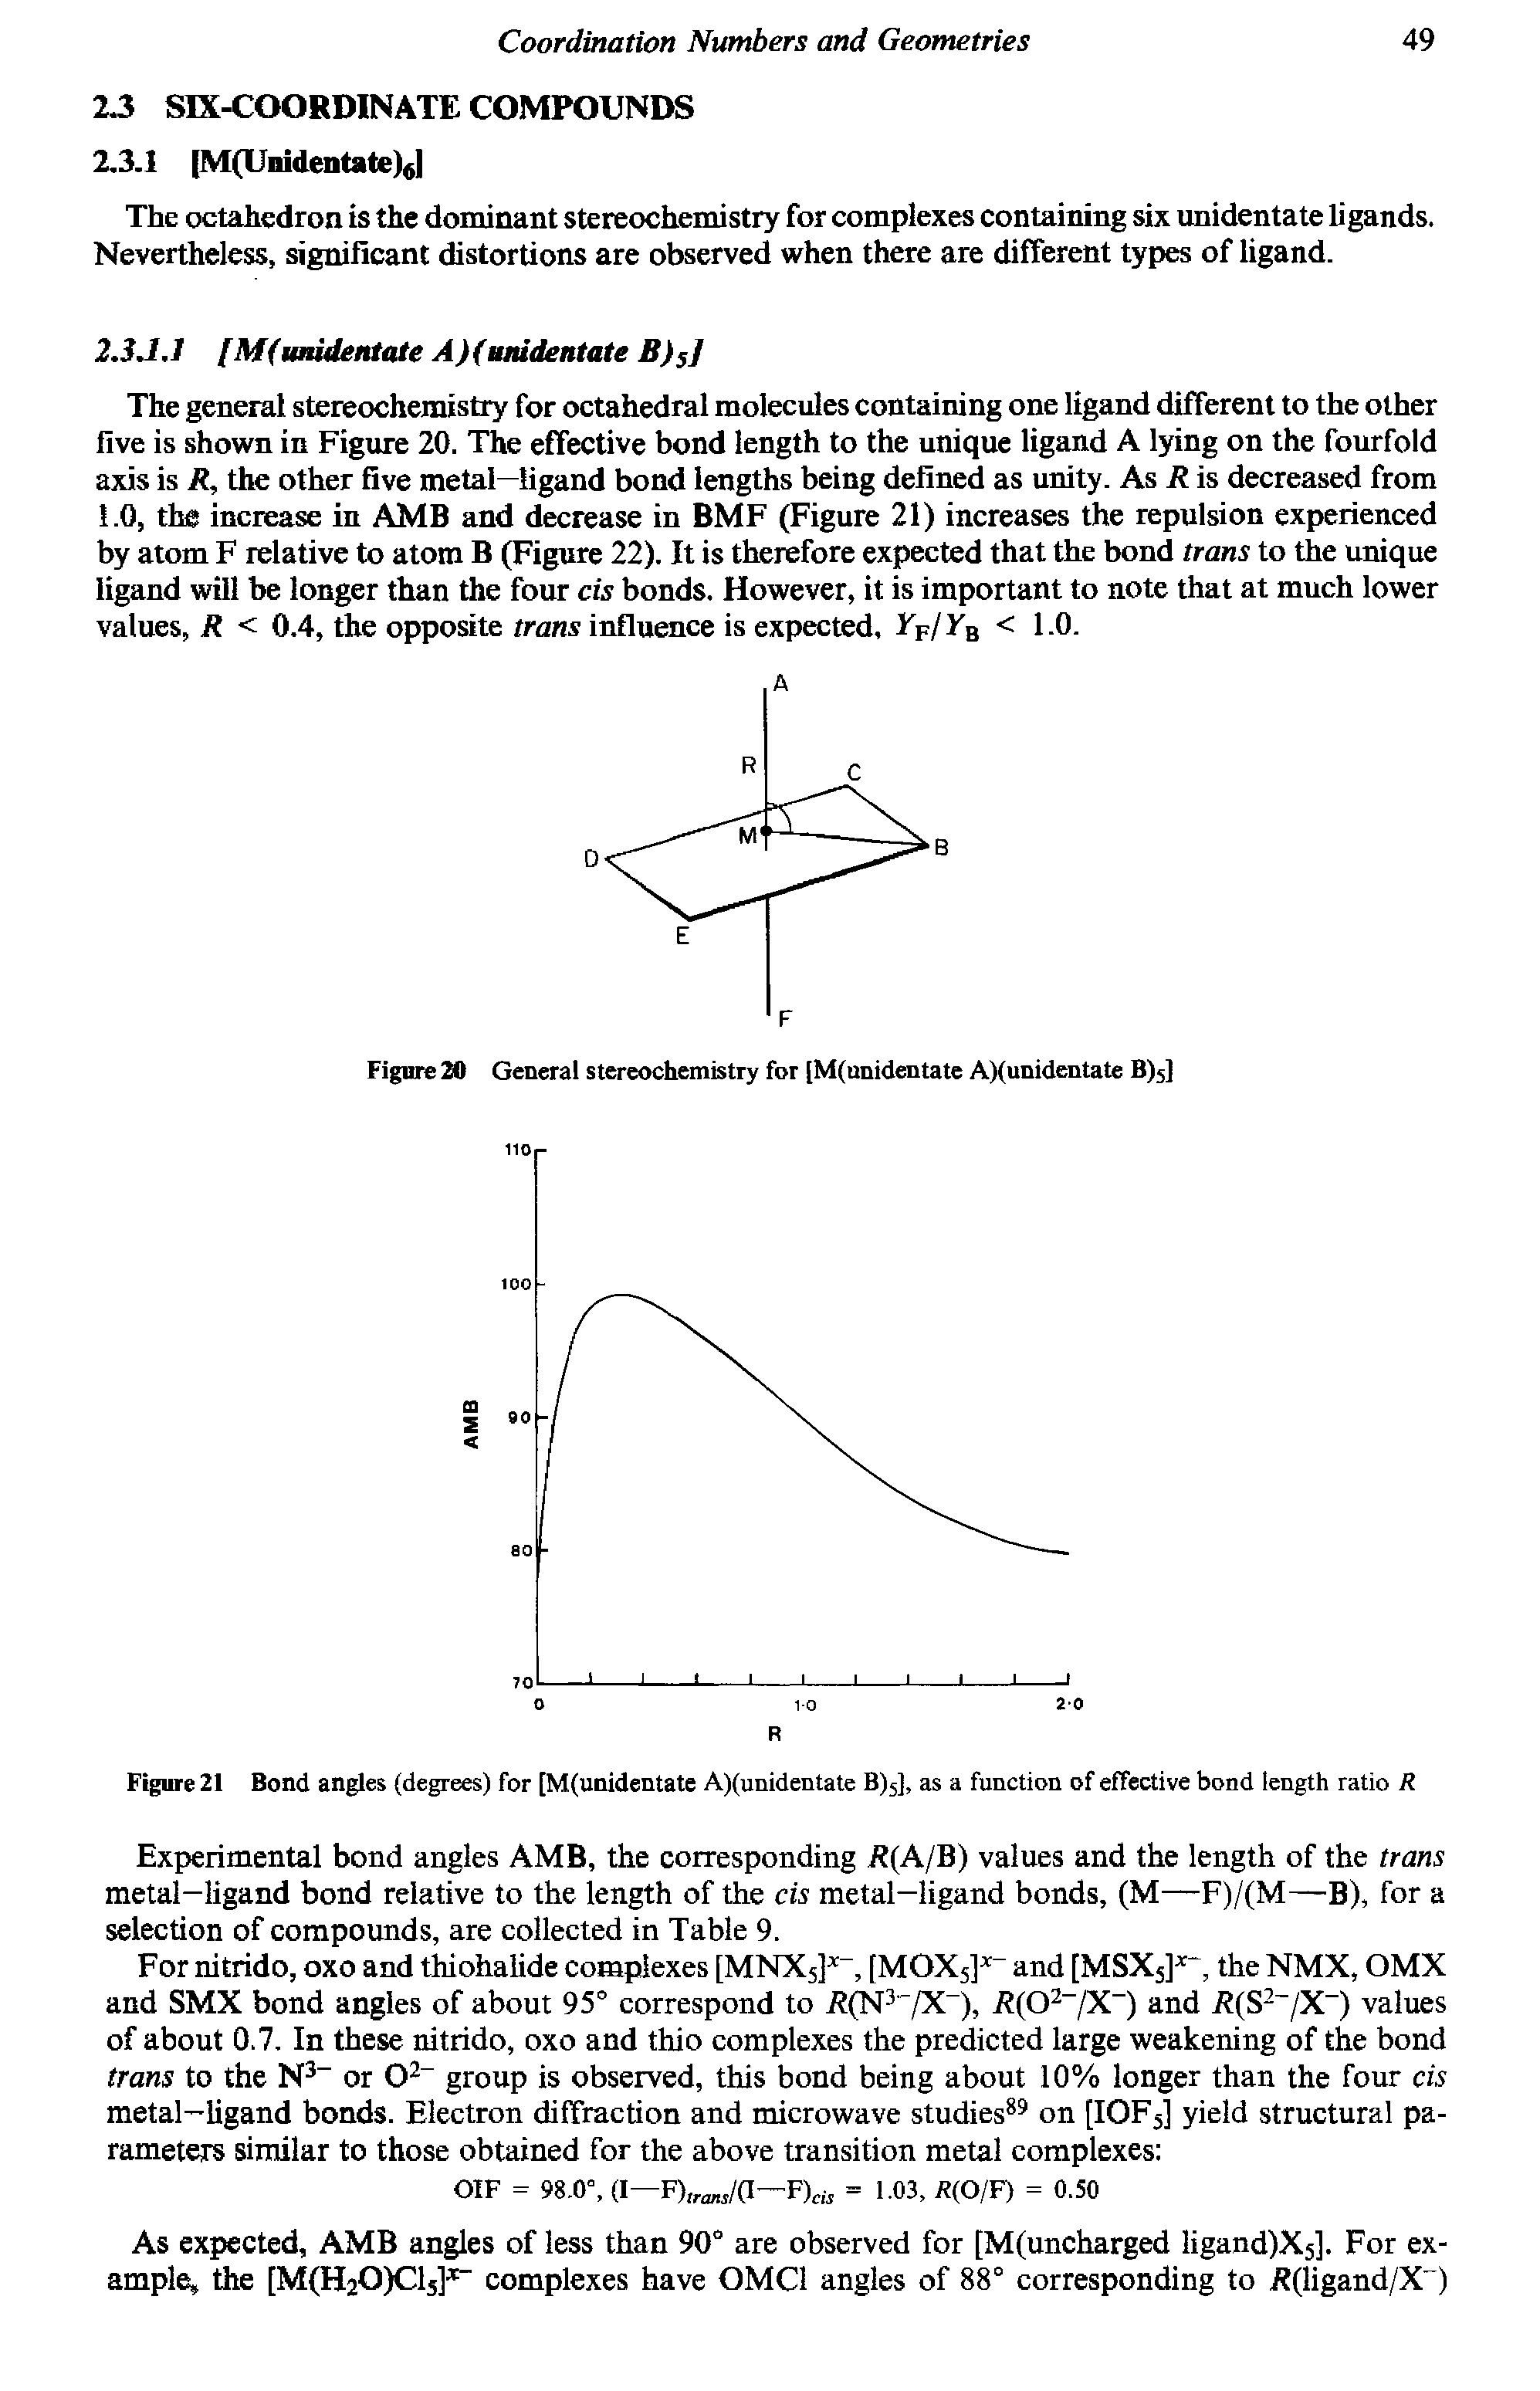 Figure 21 Bond angles (degrees) for [M(unidentate A)(unidentate B)5], as a function of effective bond length ratio R...